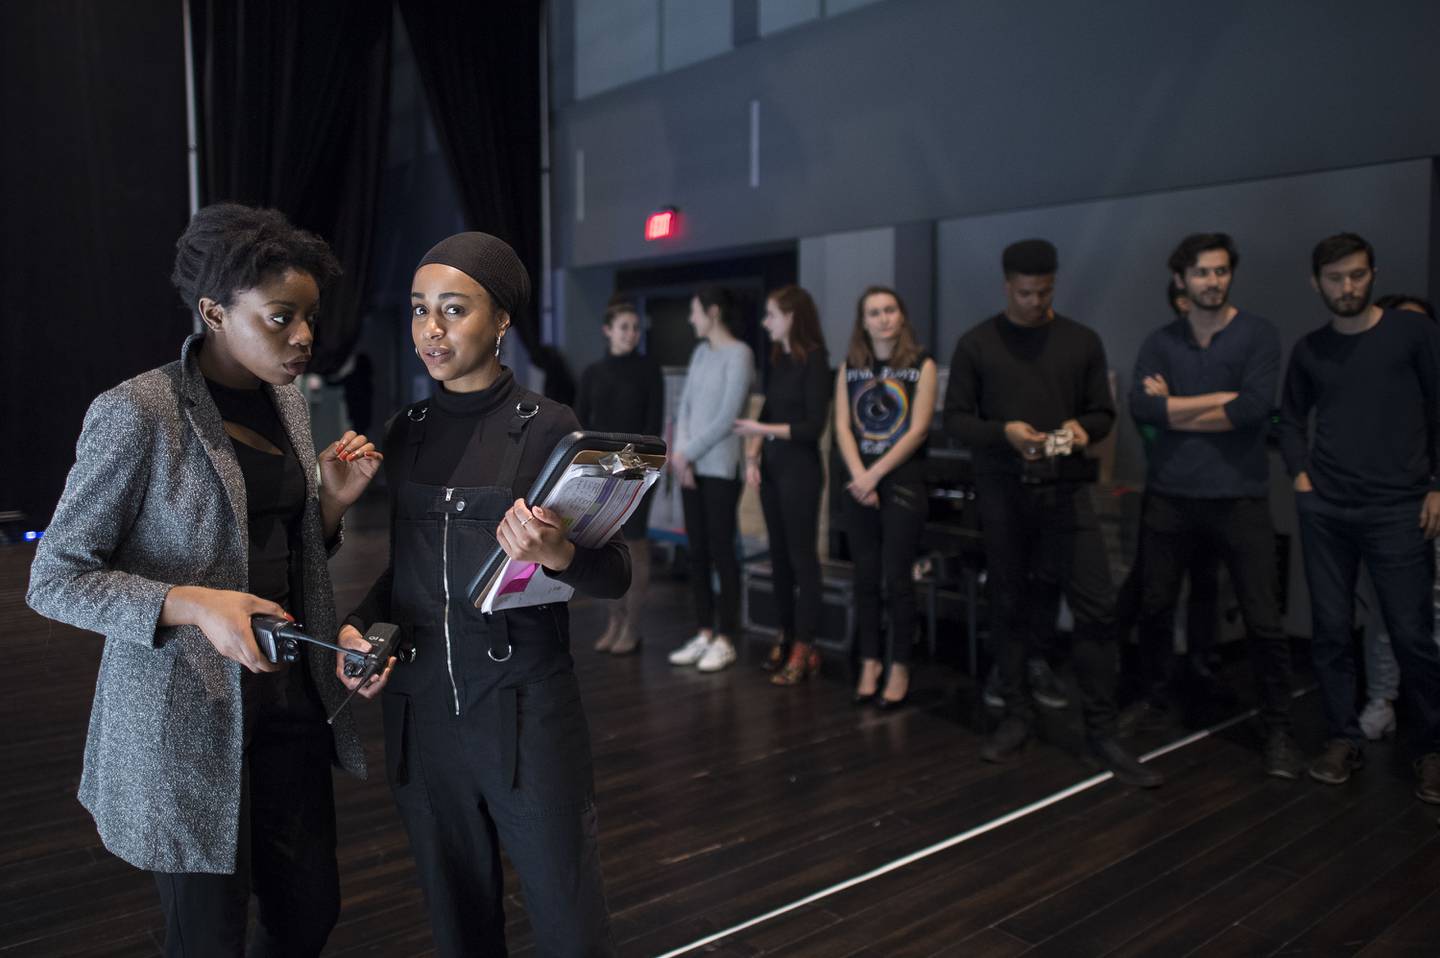 Fashion communication students Vanessa Smikle and Nadia Ebrahim preparing for Ryerson University’s graduating fashion show, which is produced by the Fashion Promotion class, in 2017. Arthur Mola.